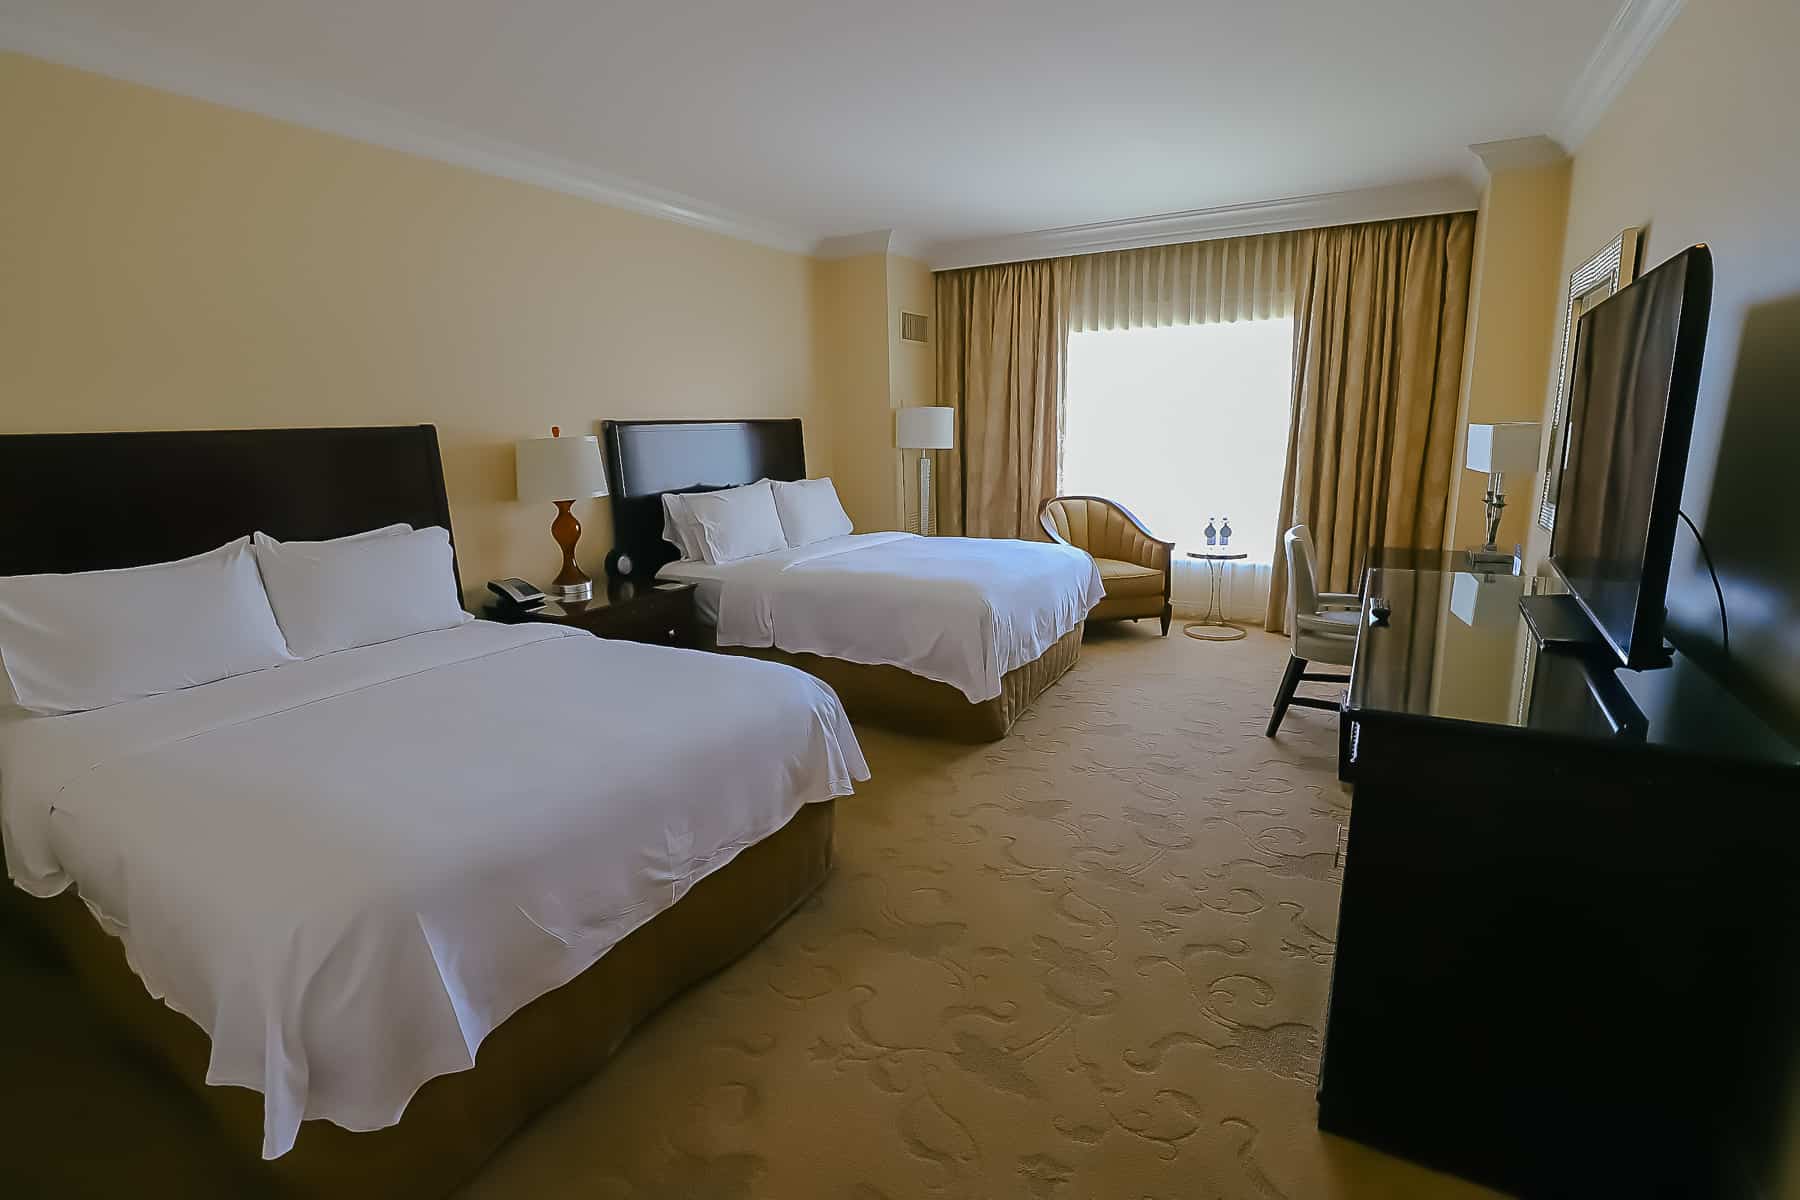 the room's layout upon entry at the Waldorf Astoria Orlando 